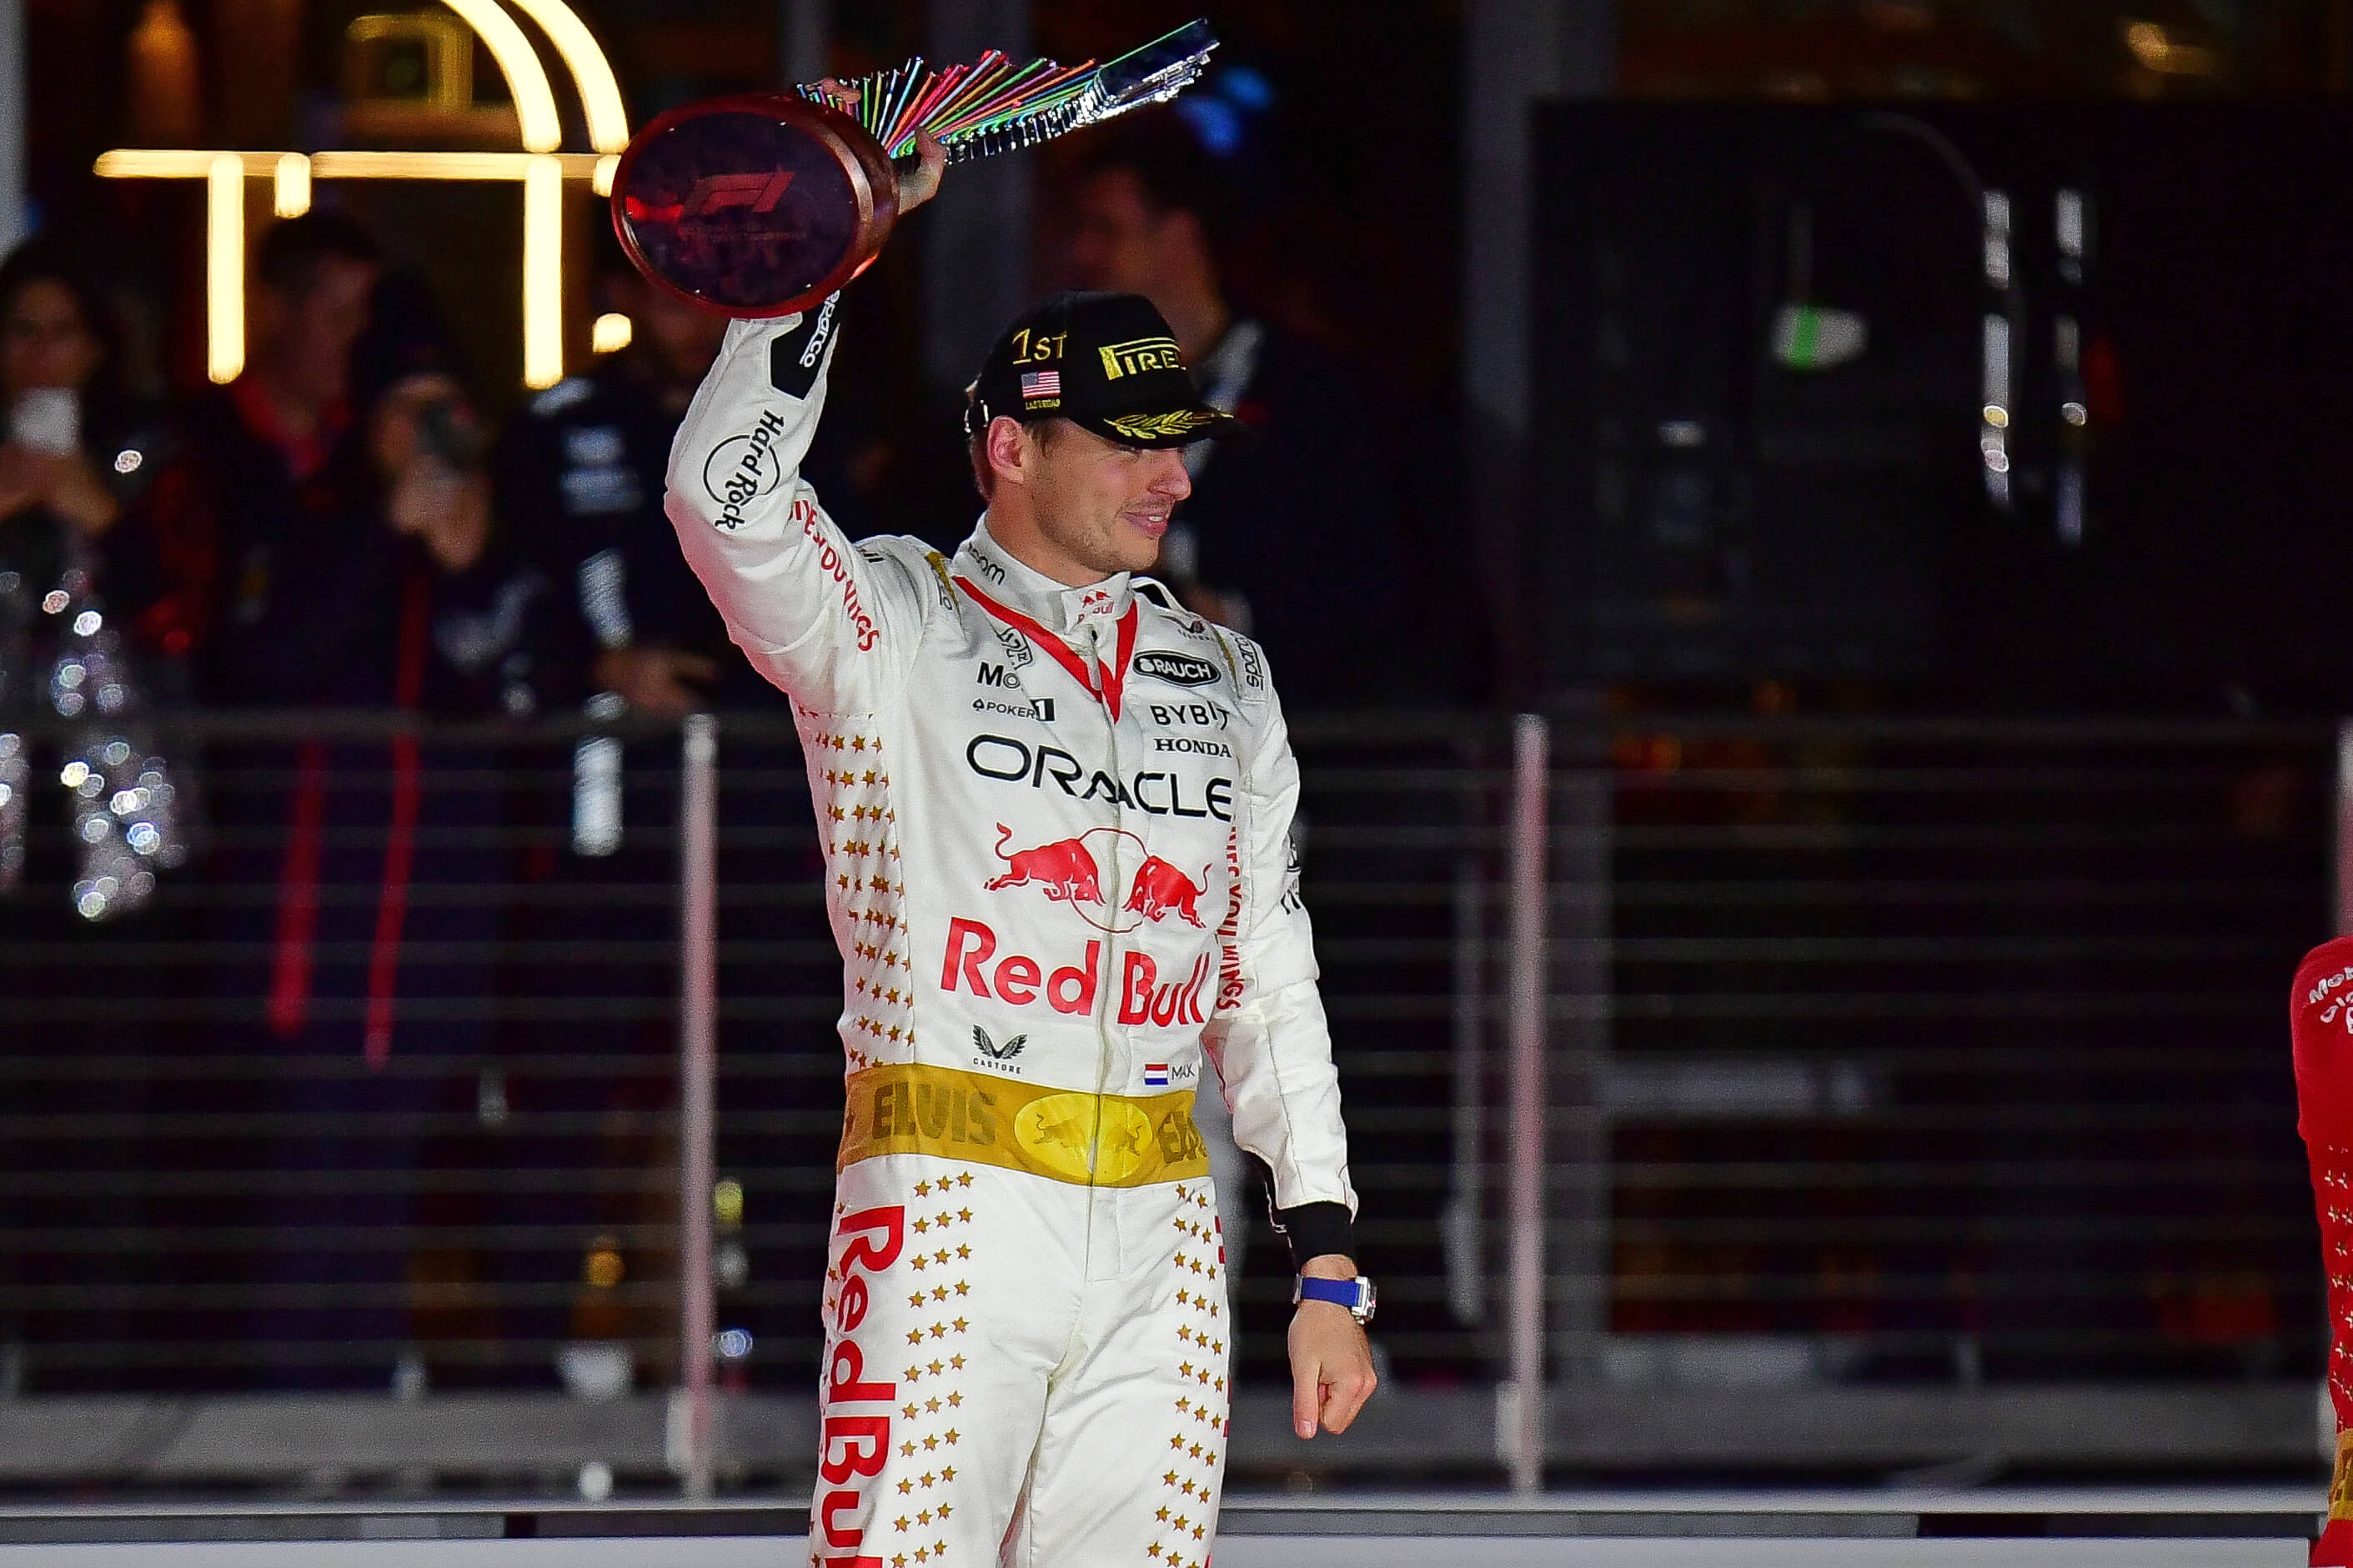 F1 Las Vegas Grand Prix: The Good, the Bad, and the Ugly 